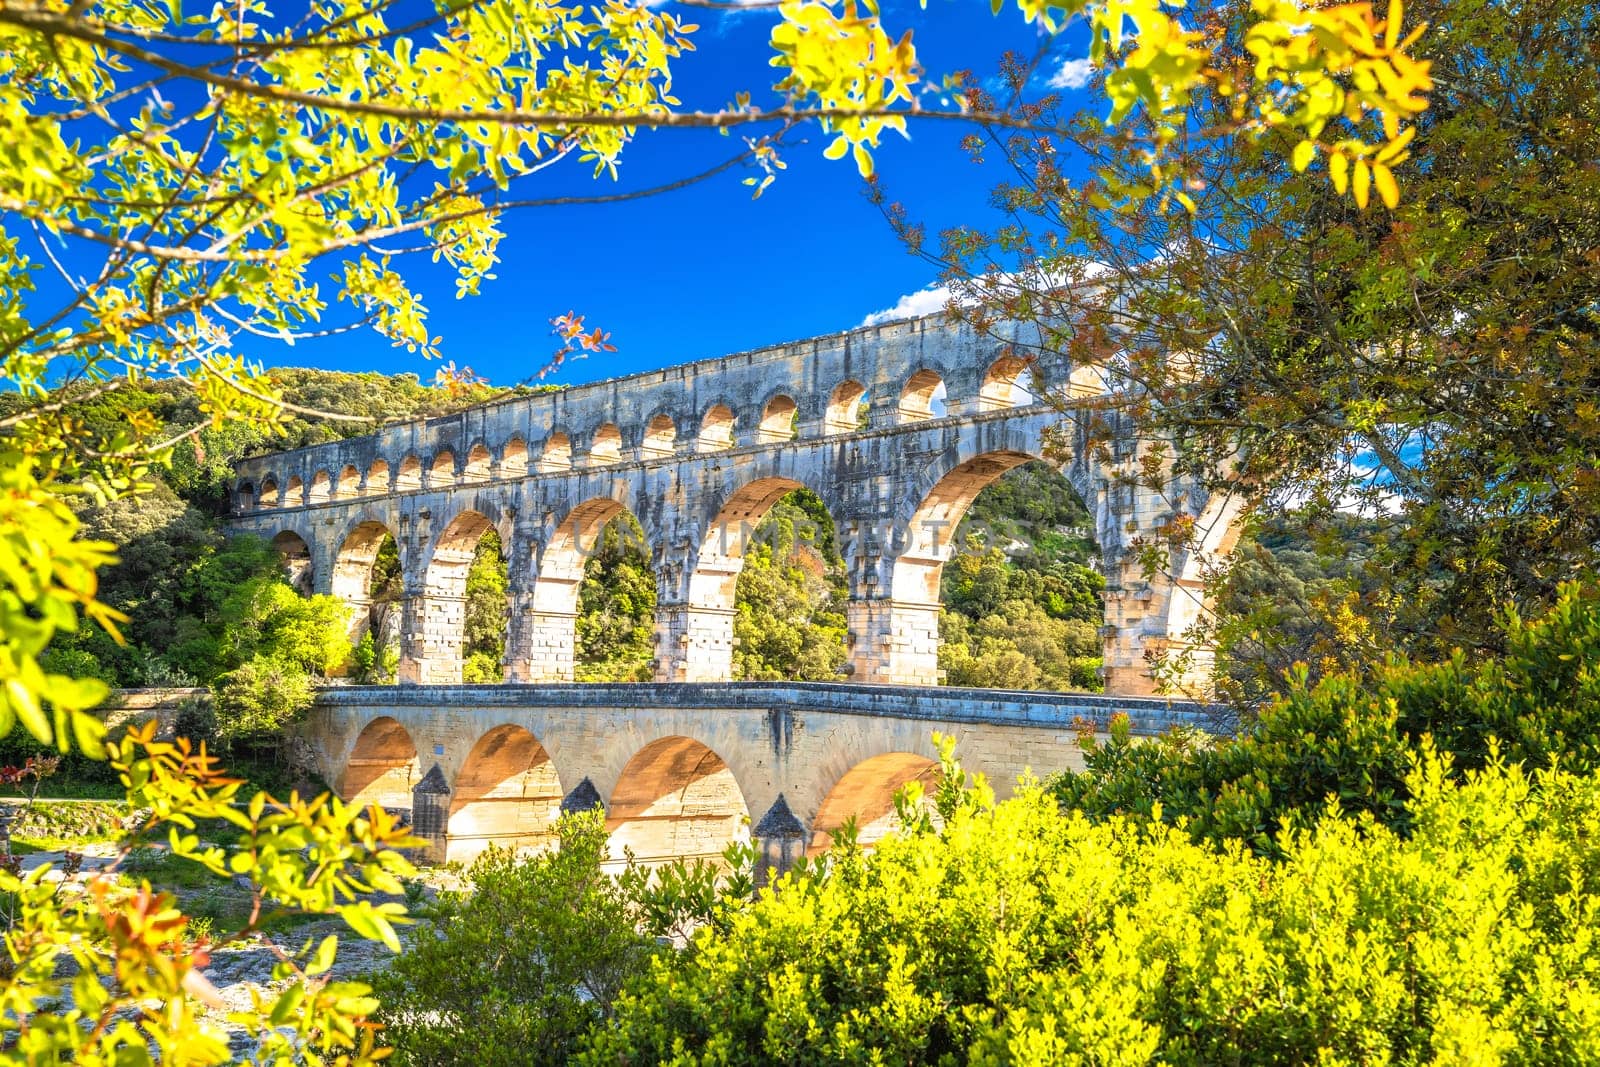 The Pont du Gard ancient Roman aqueduct bridge built in the first century AD to carry water to Nîmes. It crosses the river Gardon by xbrchx